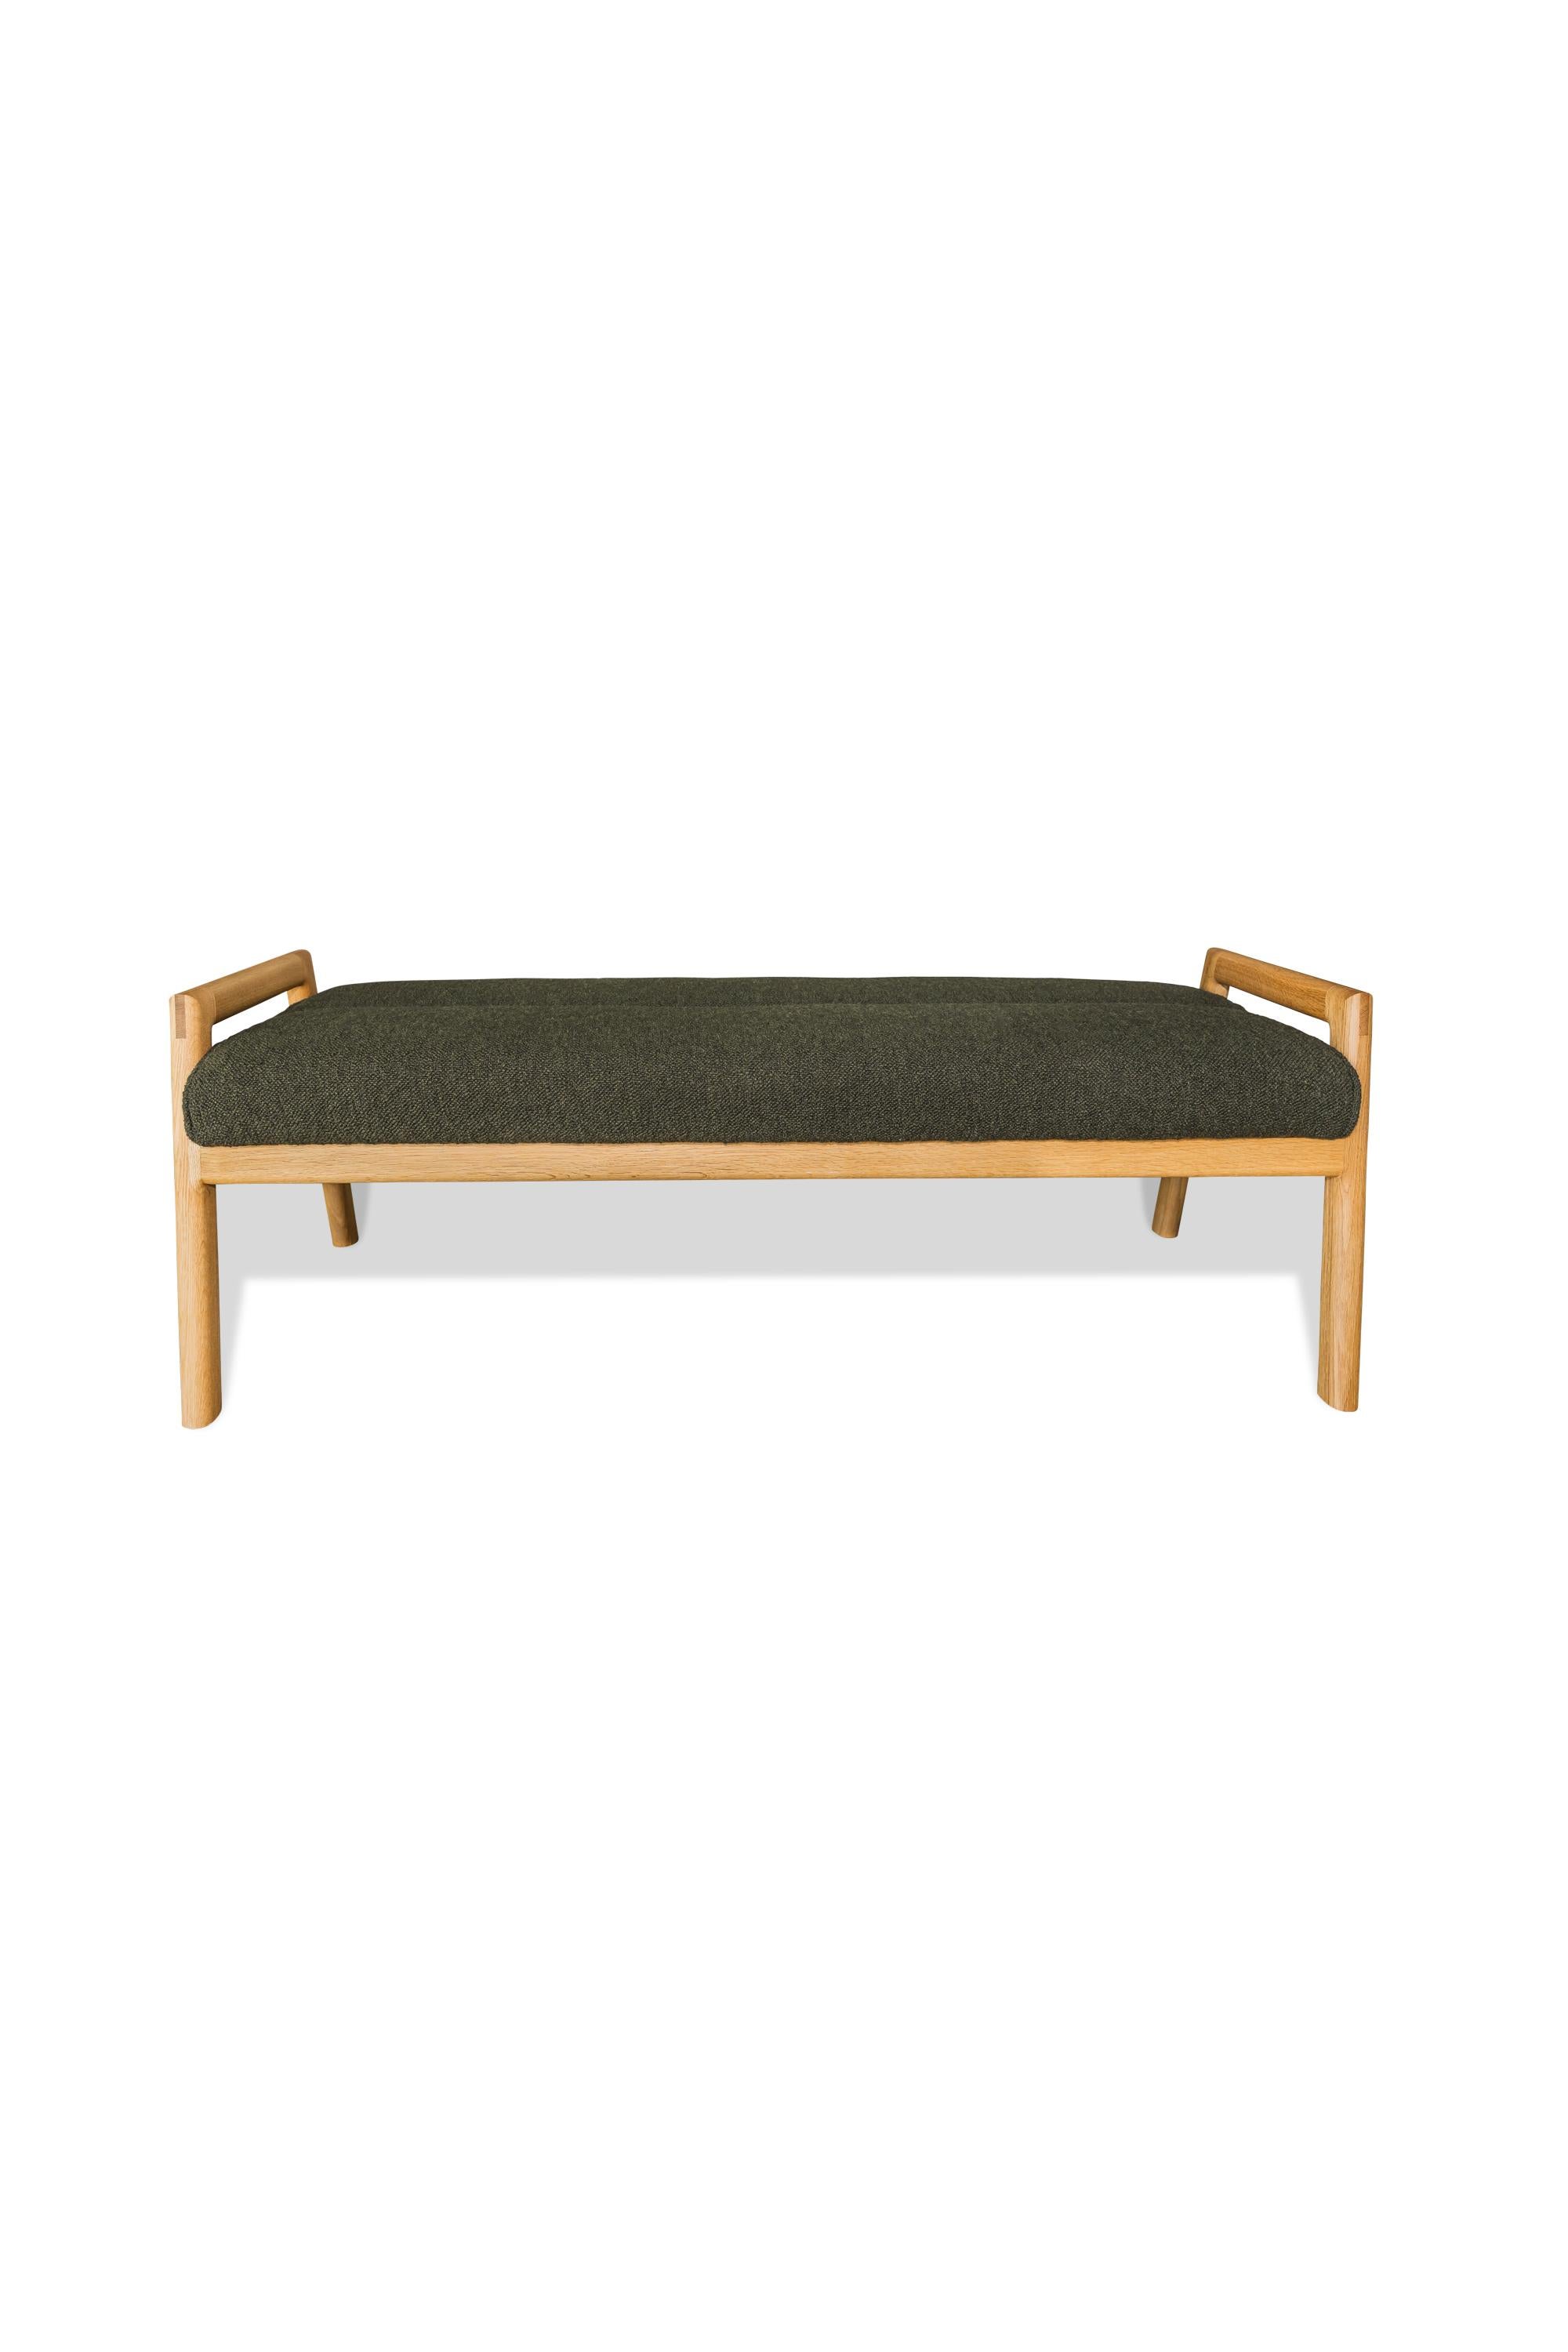 Hand-Crafted White Oak framed MORESBY Bench with custom upholstered seat For Sale